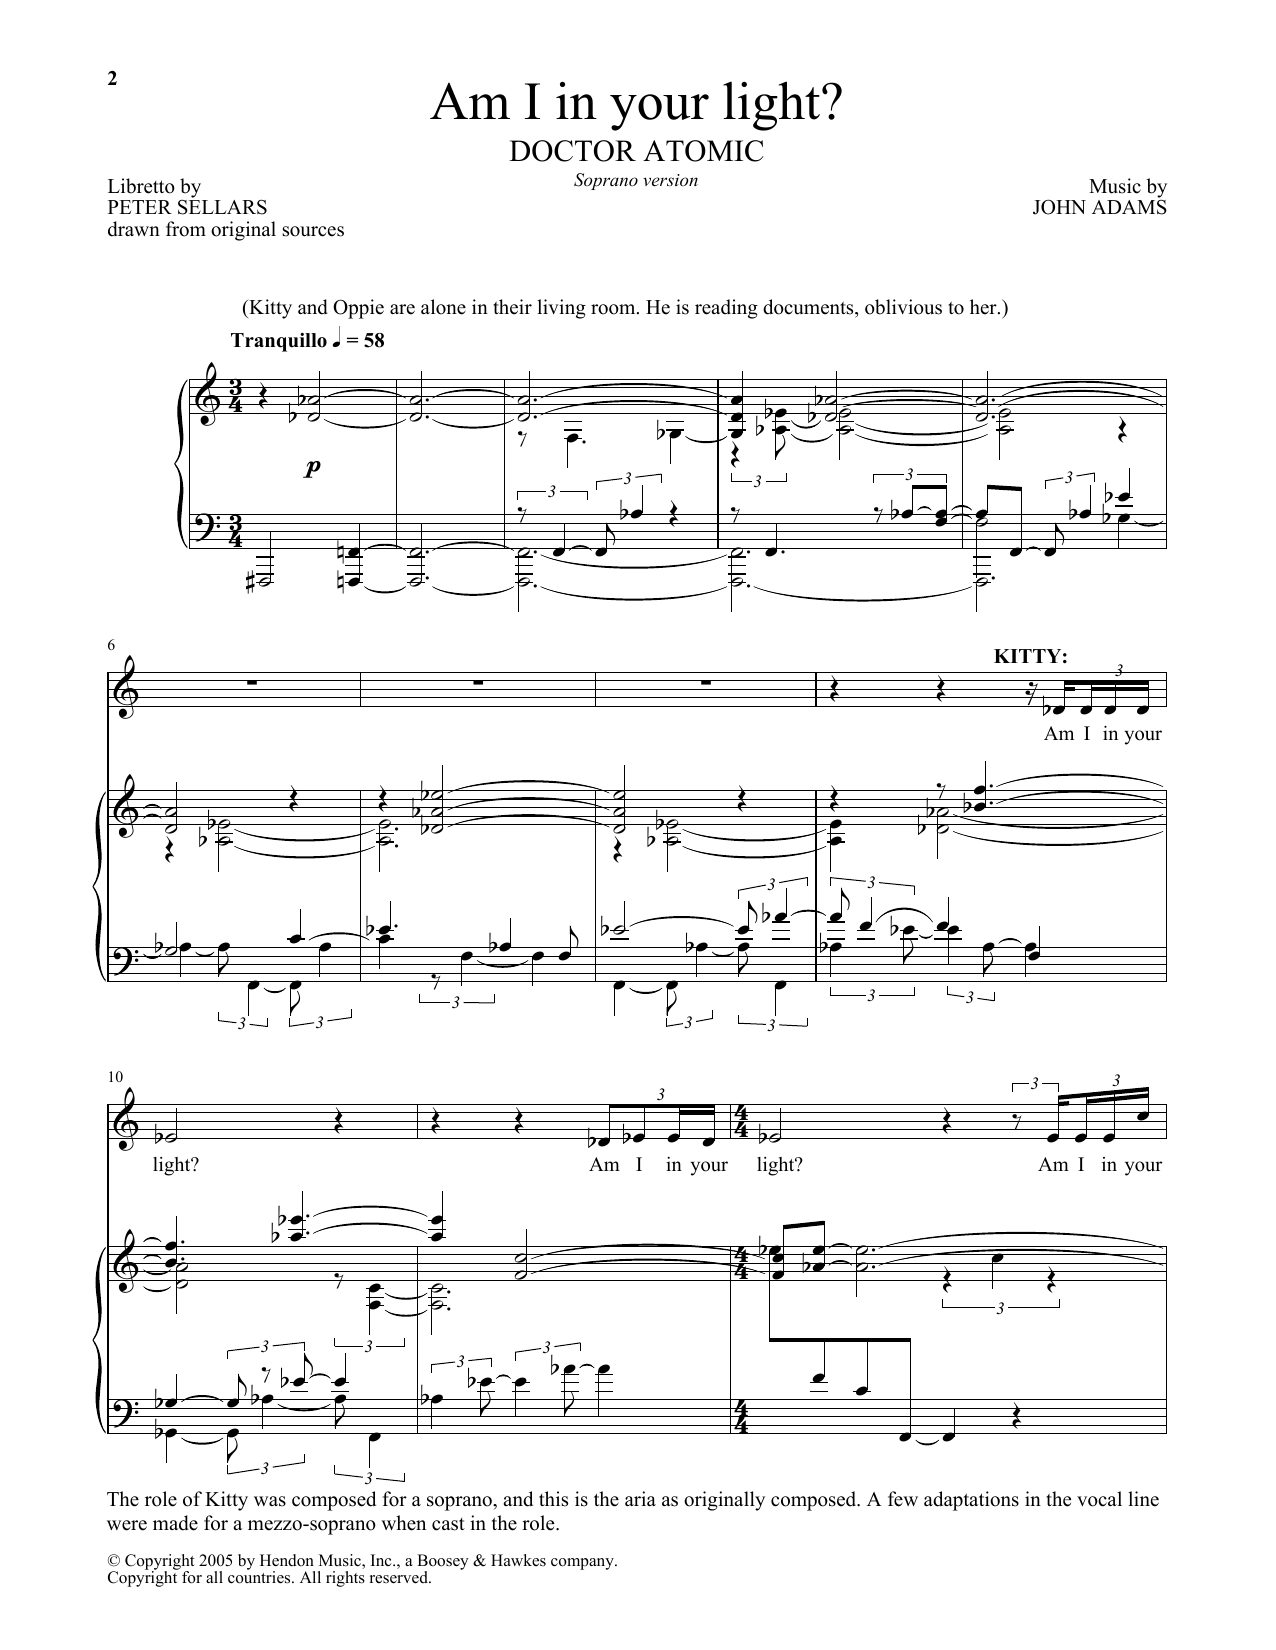 Download John Adams Am I in your light? (from Doctor Atomic Sheet Music